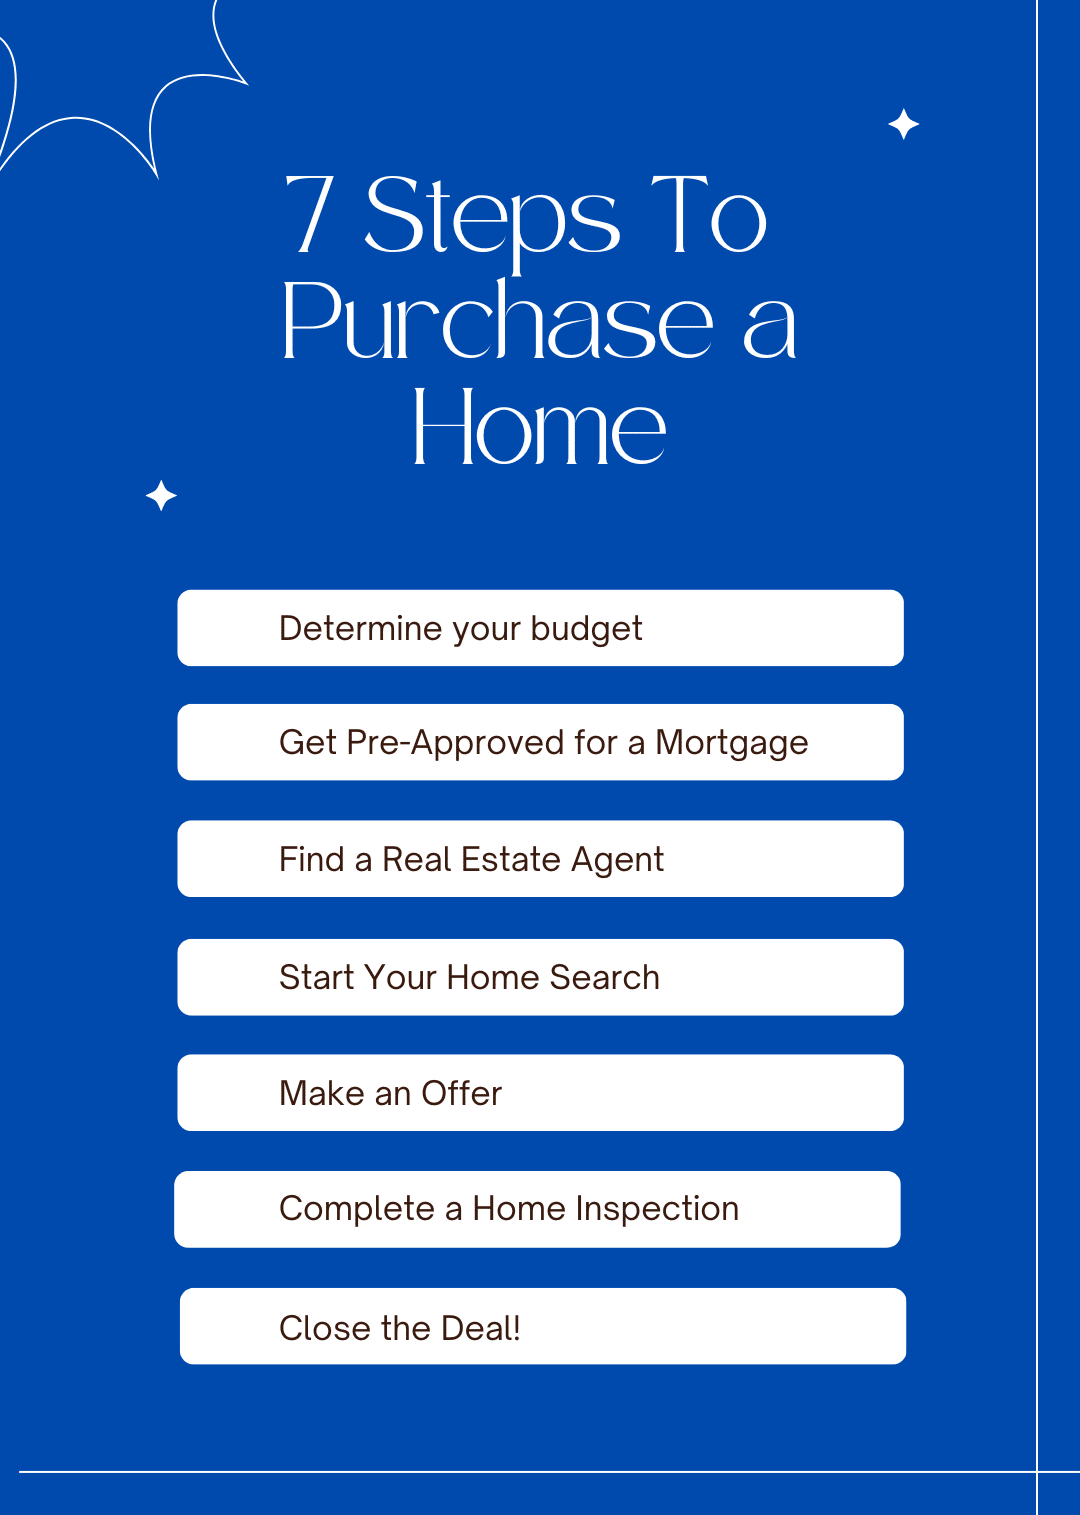 Steps for purchasing a home